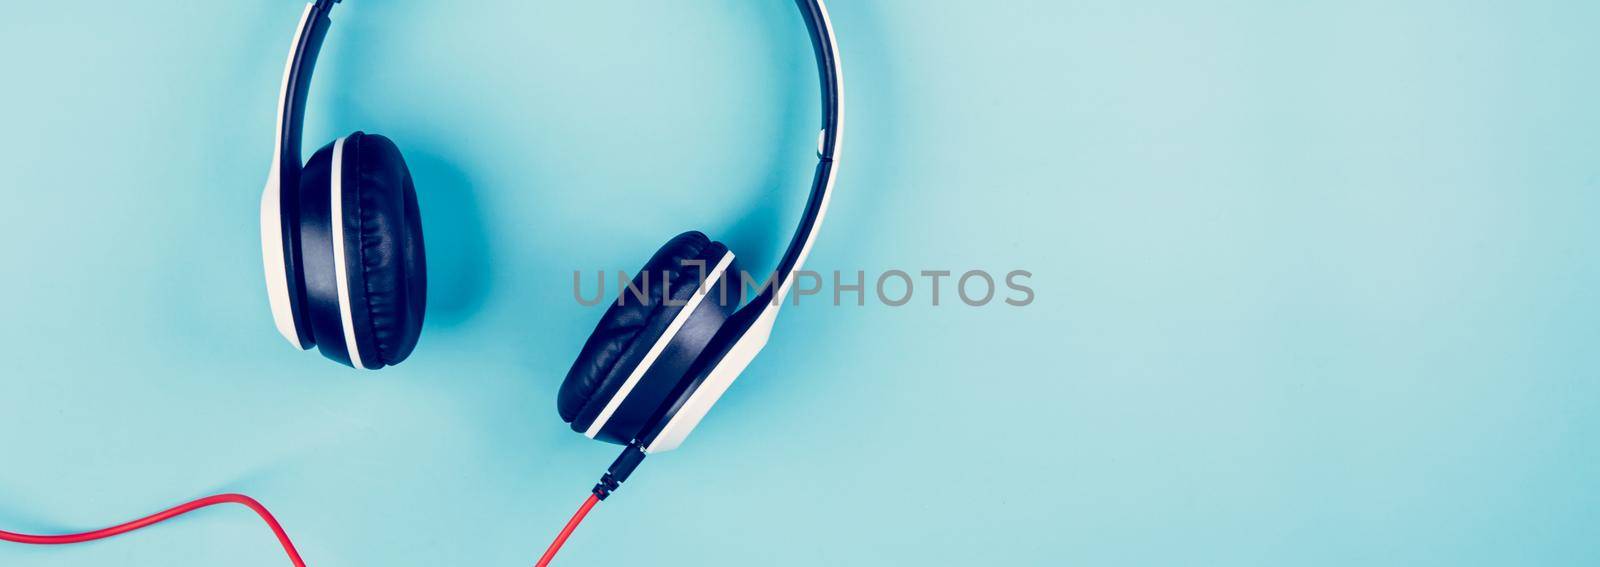 Headphones with music isolated on blue background, device headset and sound stereo, equipment entertainment, listening communication, flat lay, top view, nobody, electronic accessory object.